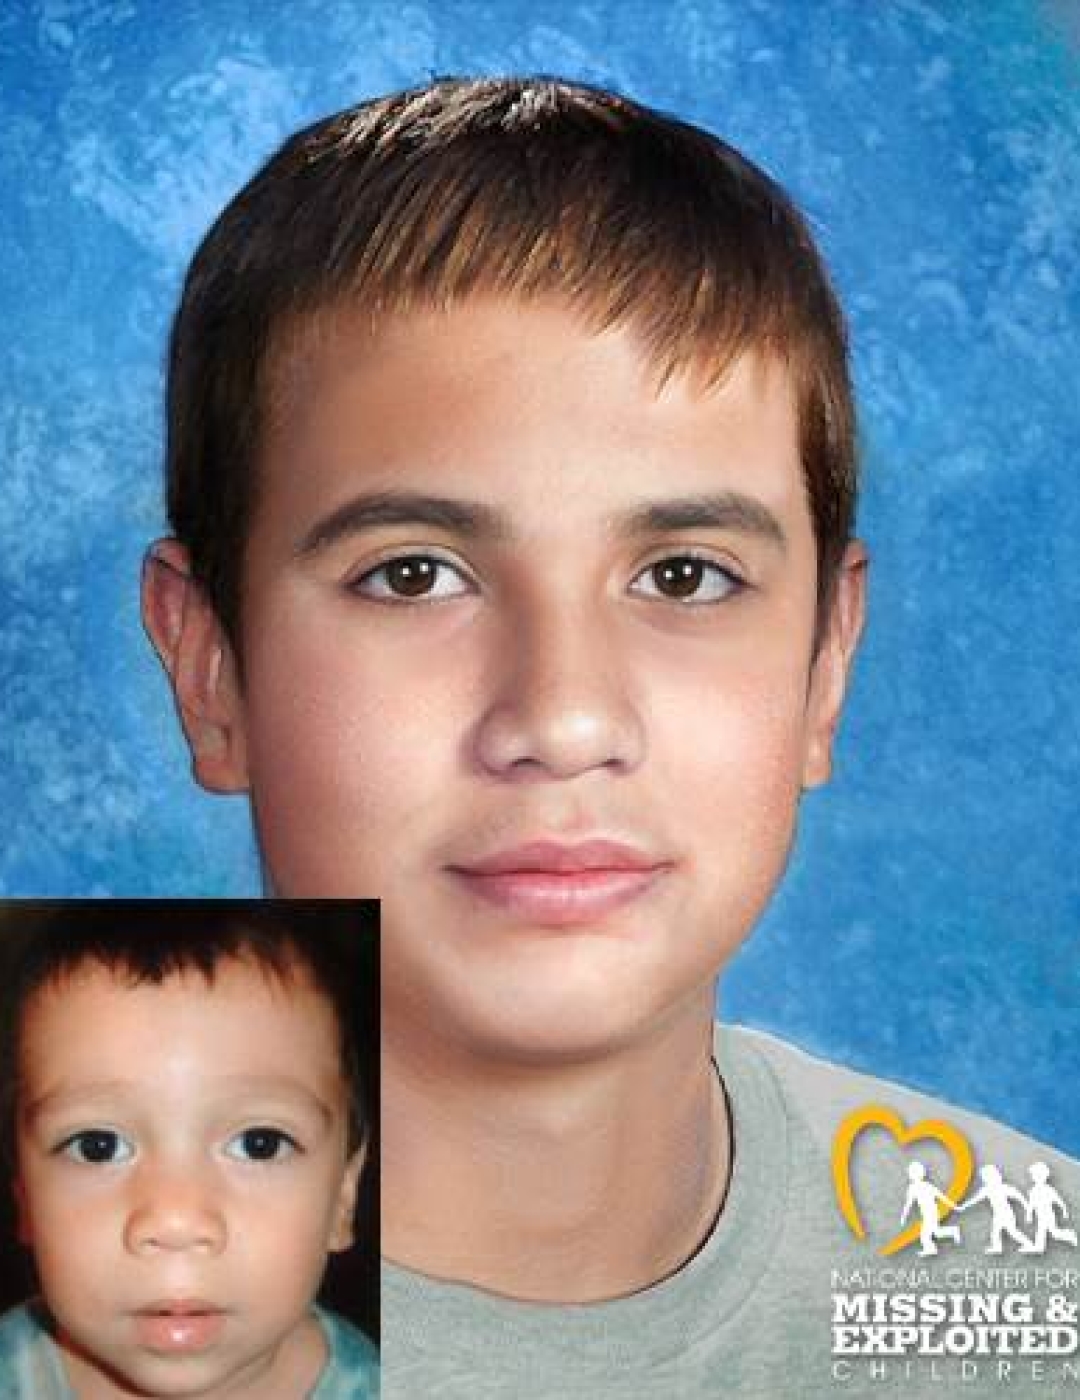 Diego Flores. Missing child with light brown hair and brown eyes. Age progressed photo shows what Diego looks like at 16 years old: an adult woman with long brown hair, brown eyes, and side bangs.